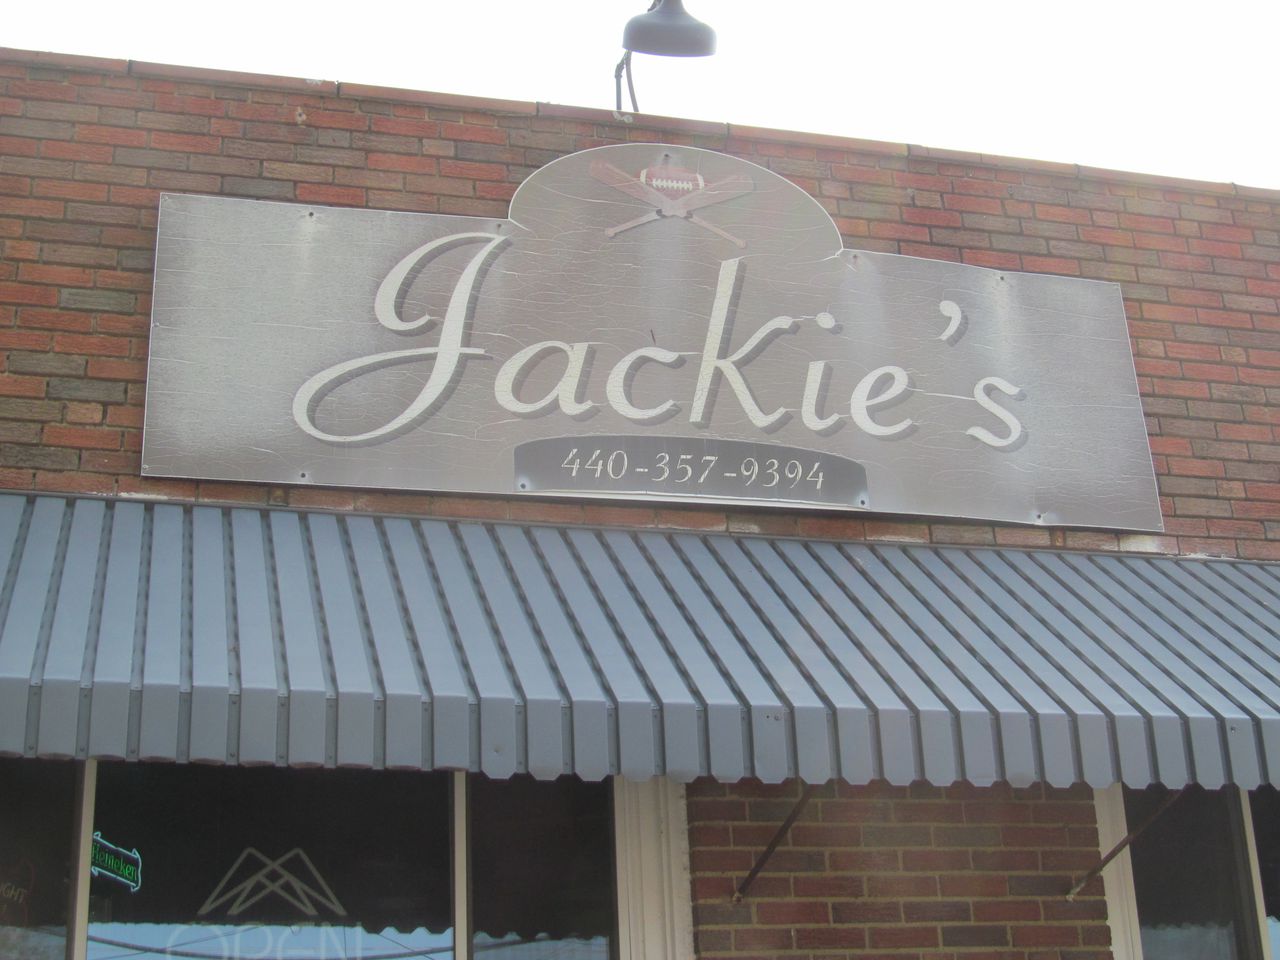 Jackie's has one of the highest health inspector violation counts in Lake County.